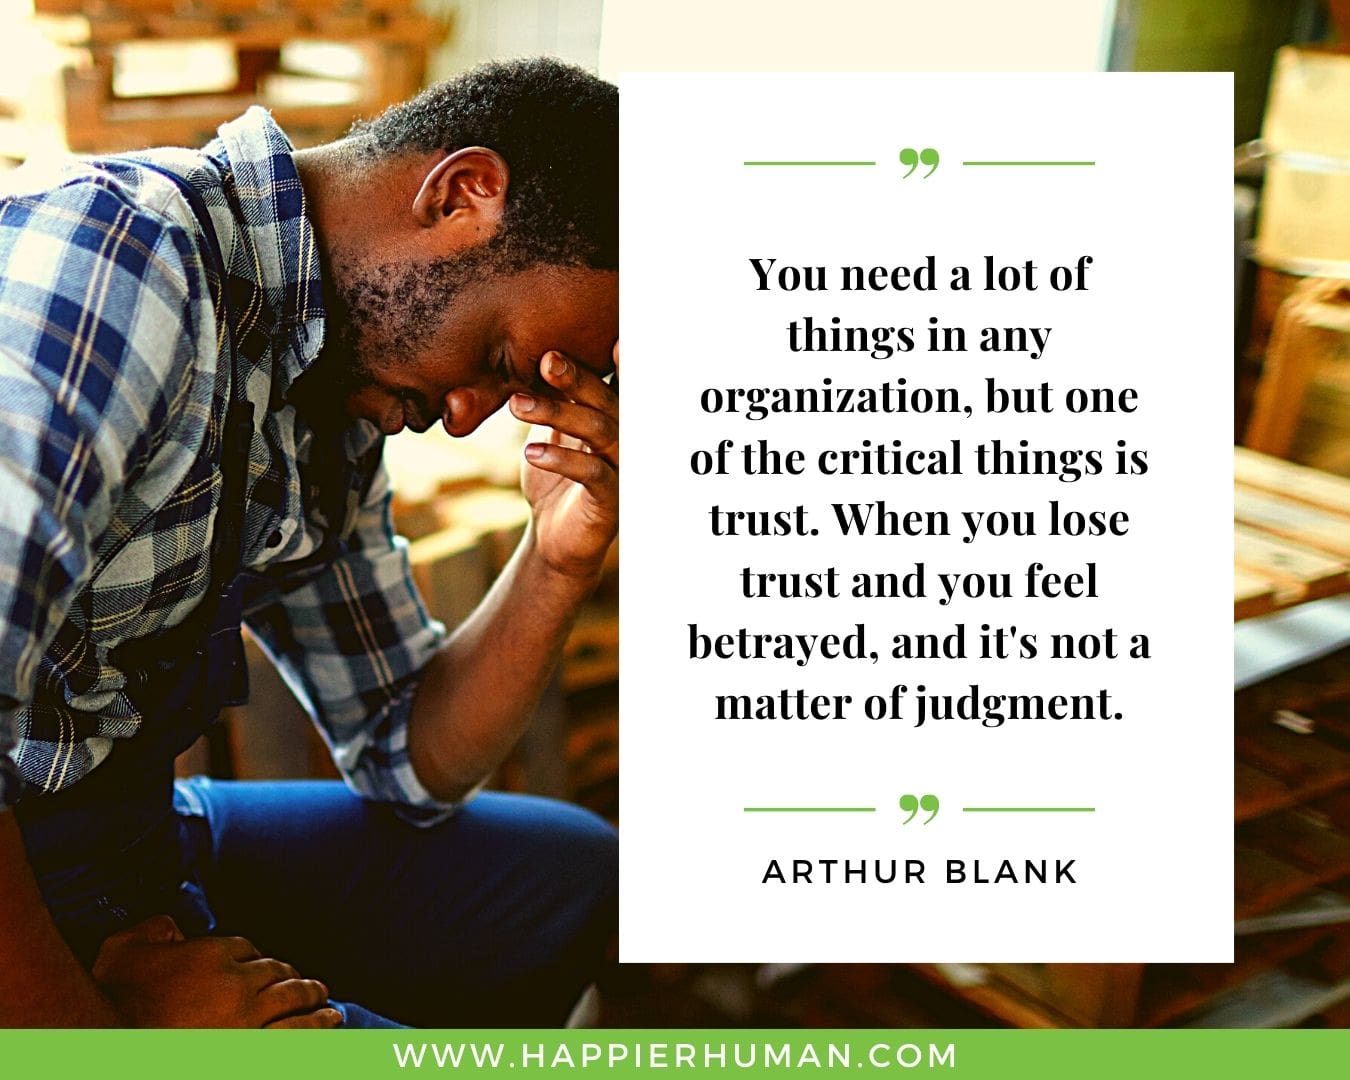 Broken Trust Quotes - “You need a lot of things in any organization, but one of the critical things is trust. When you lose trust and you feel betrayed, and it's not a matter of judgment.” - Arthur Blank